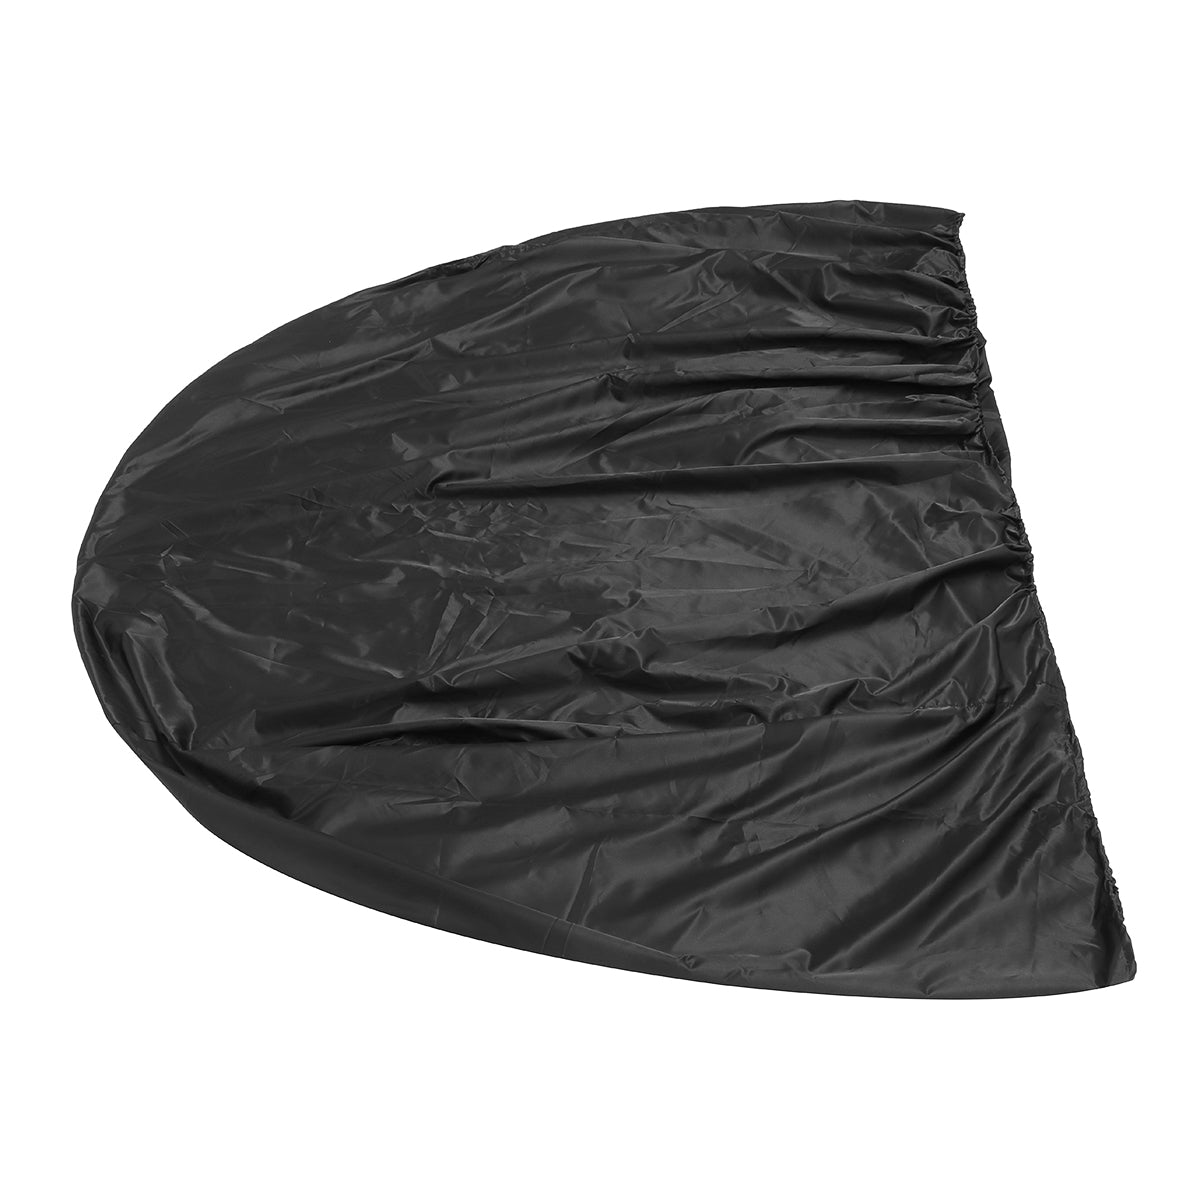 120x47.5x90cm BBQ Grill Cover Outdoor Picnic Waterproof Dust Rain UV Proof Protector Barbeque Accessories